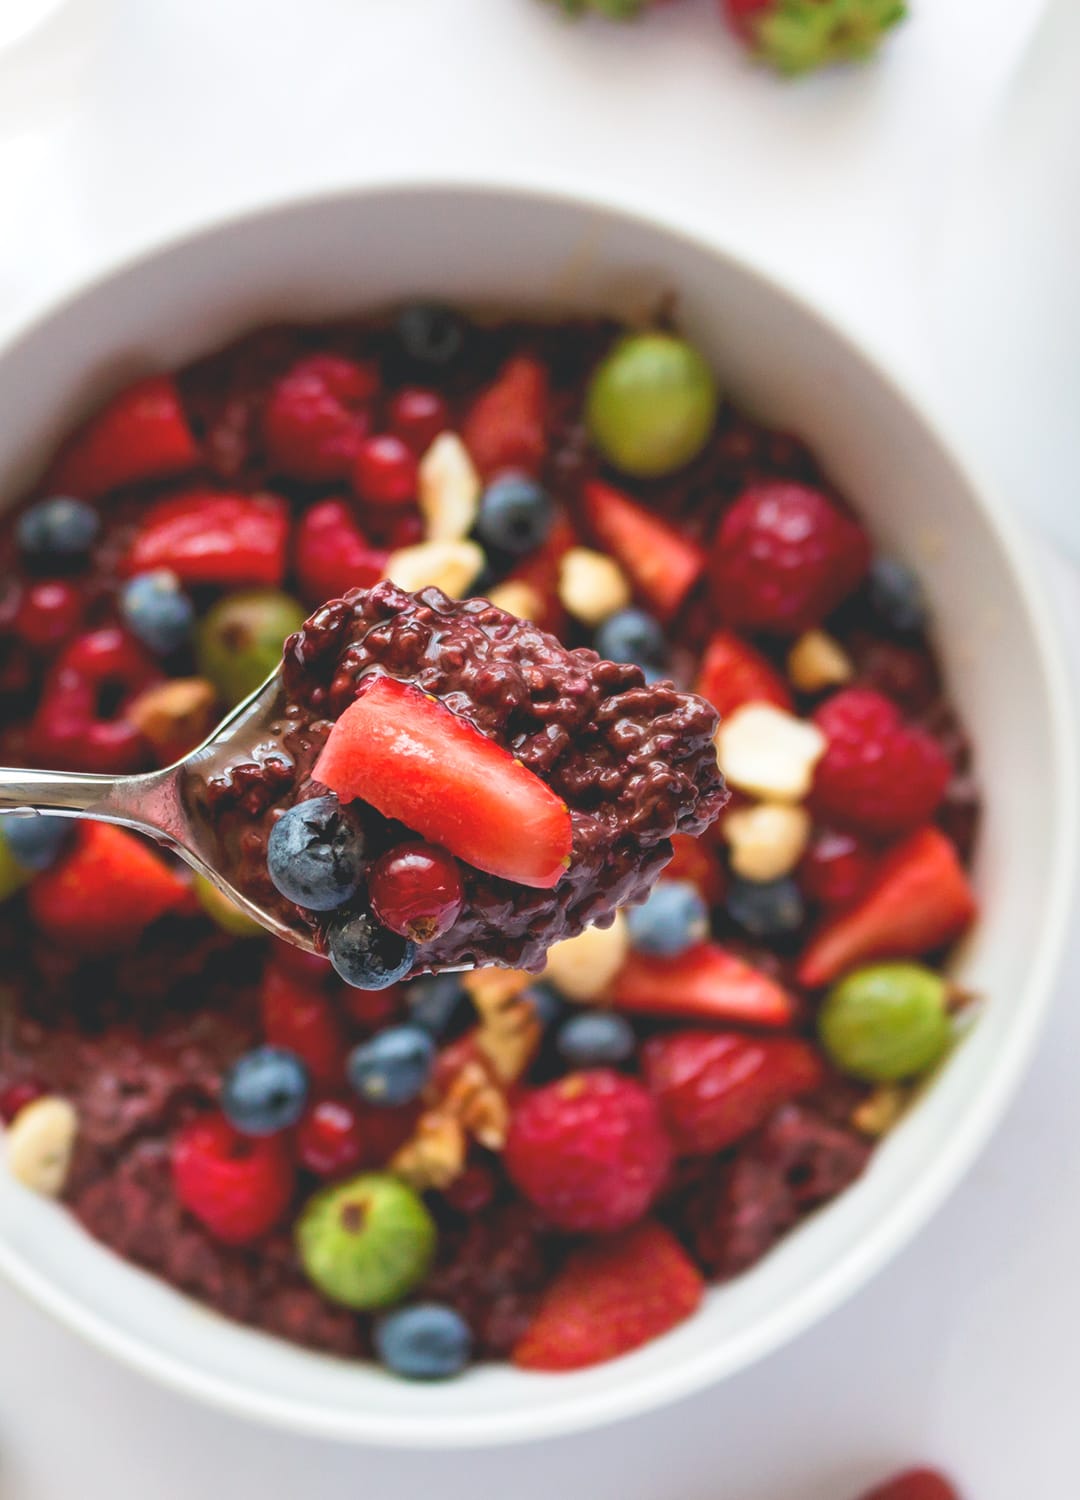 Raspberry Chia Overnight Oats with Acai - the best breakfast to start your day right. Full of raspberries, cacao, acai, and chia seeds. YUM! We love this recipe!| thehealthfulideas.com